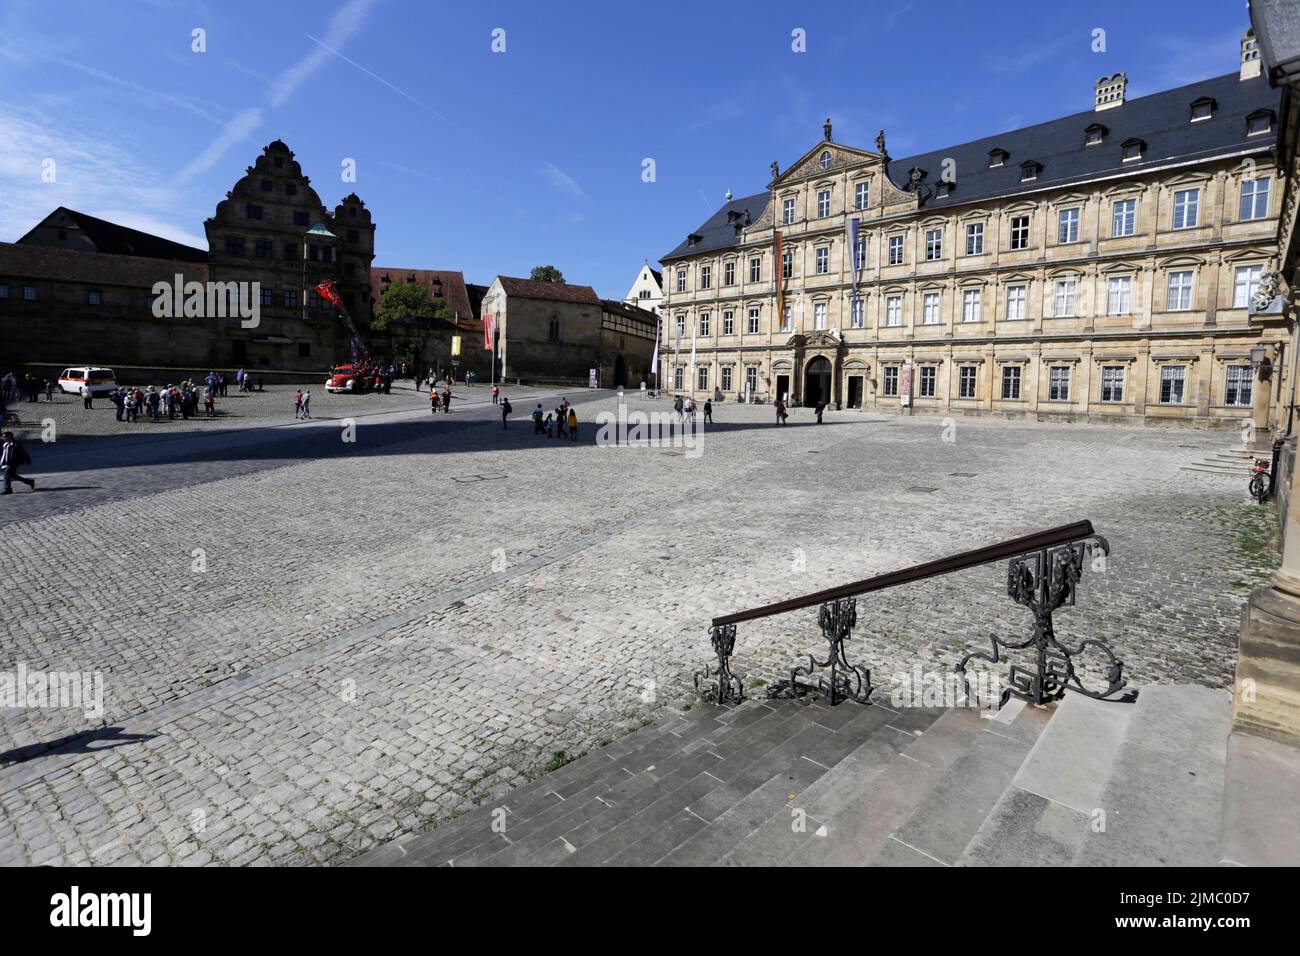 The New Residence of Bamberg, Germany Stock Photo